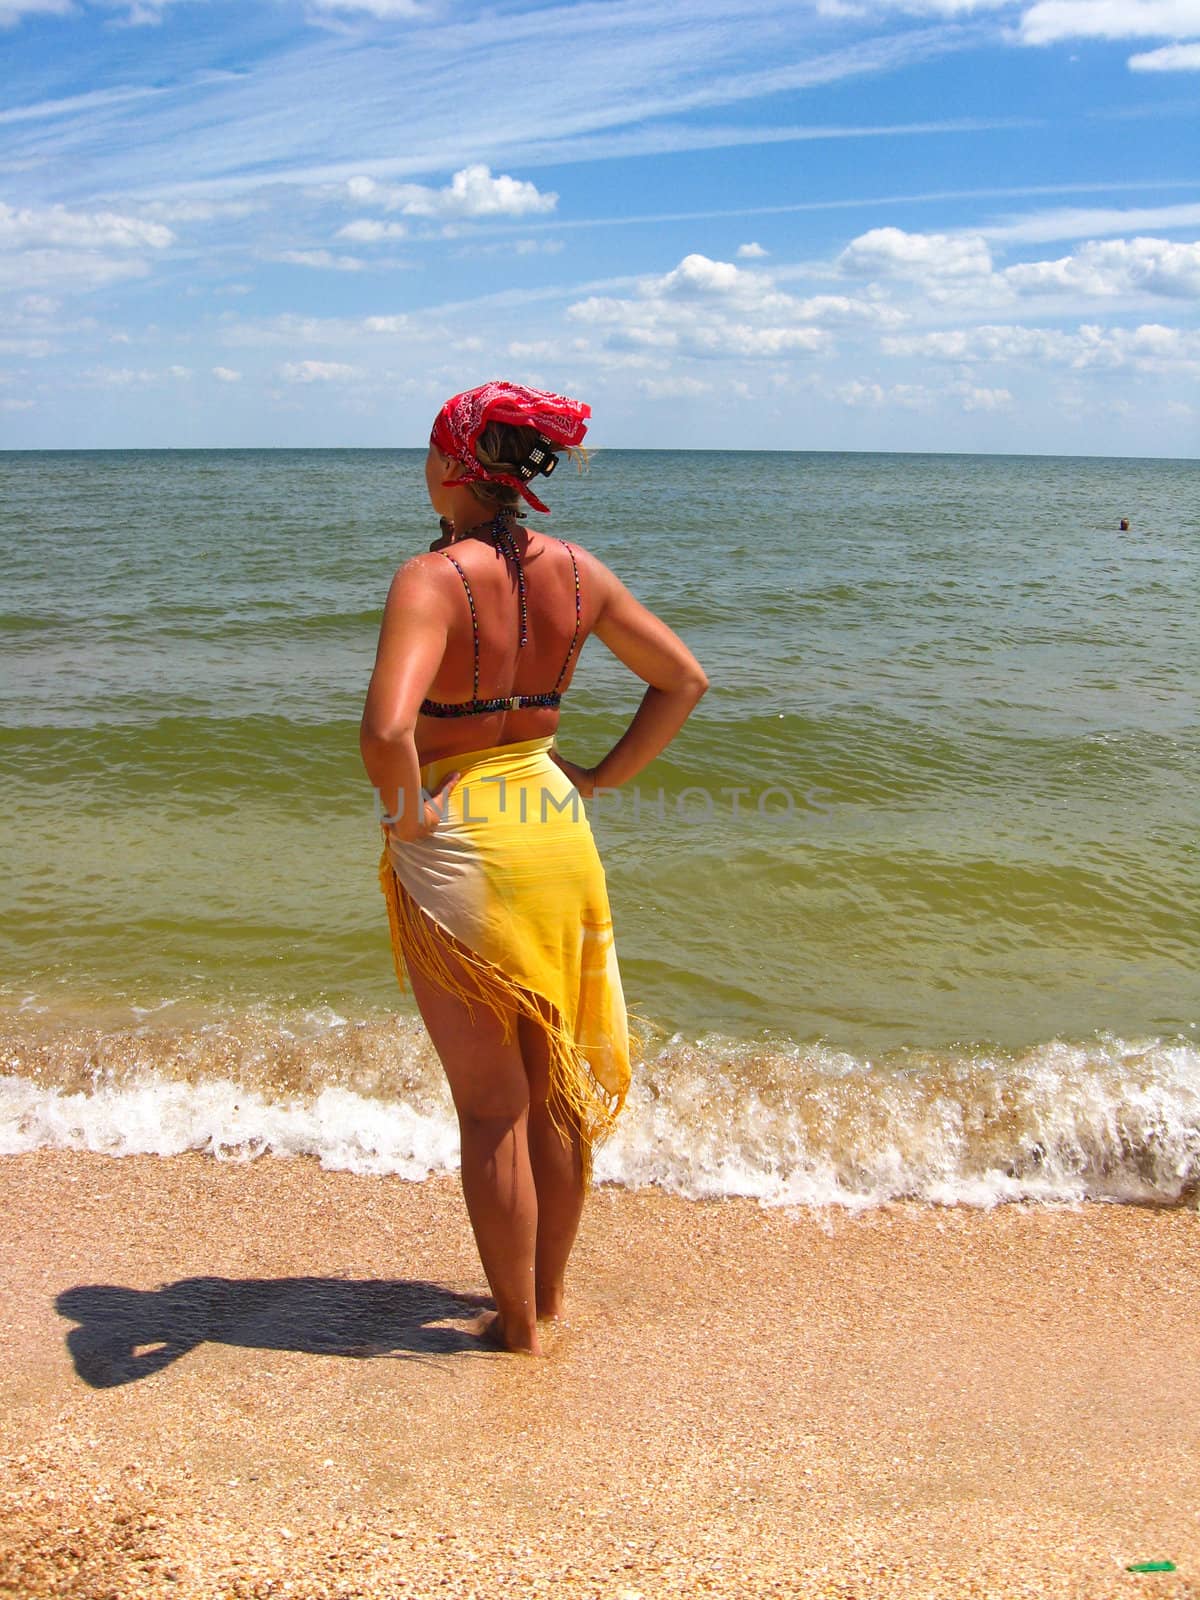 The girl in bathing suit standing at the seacoast